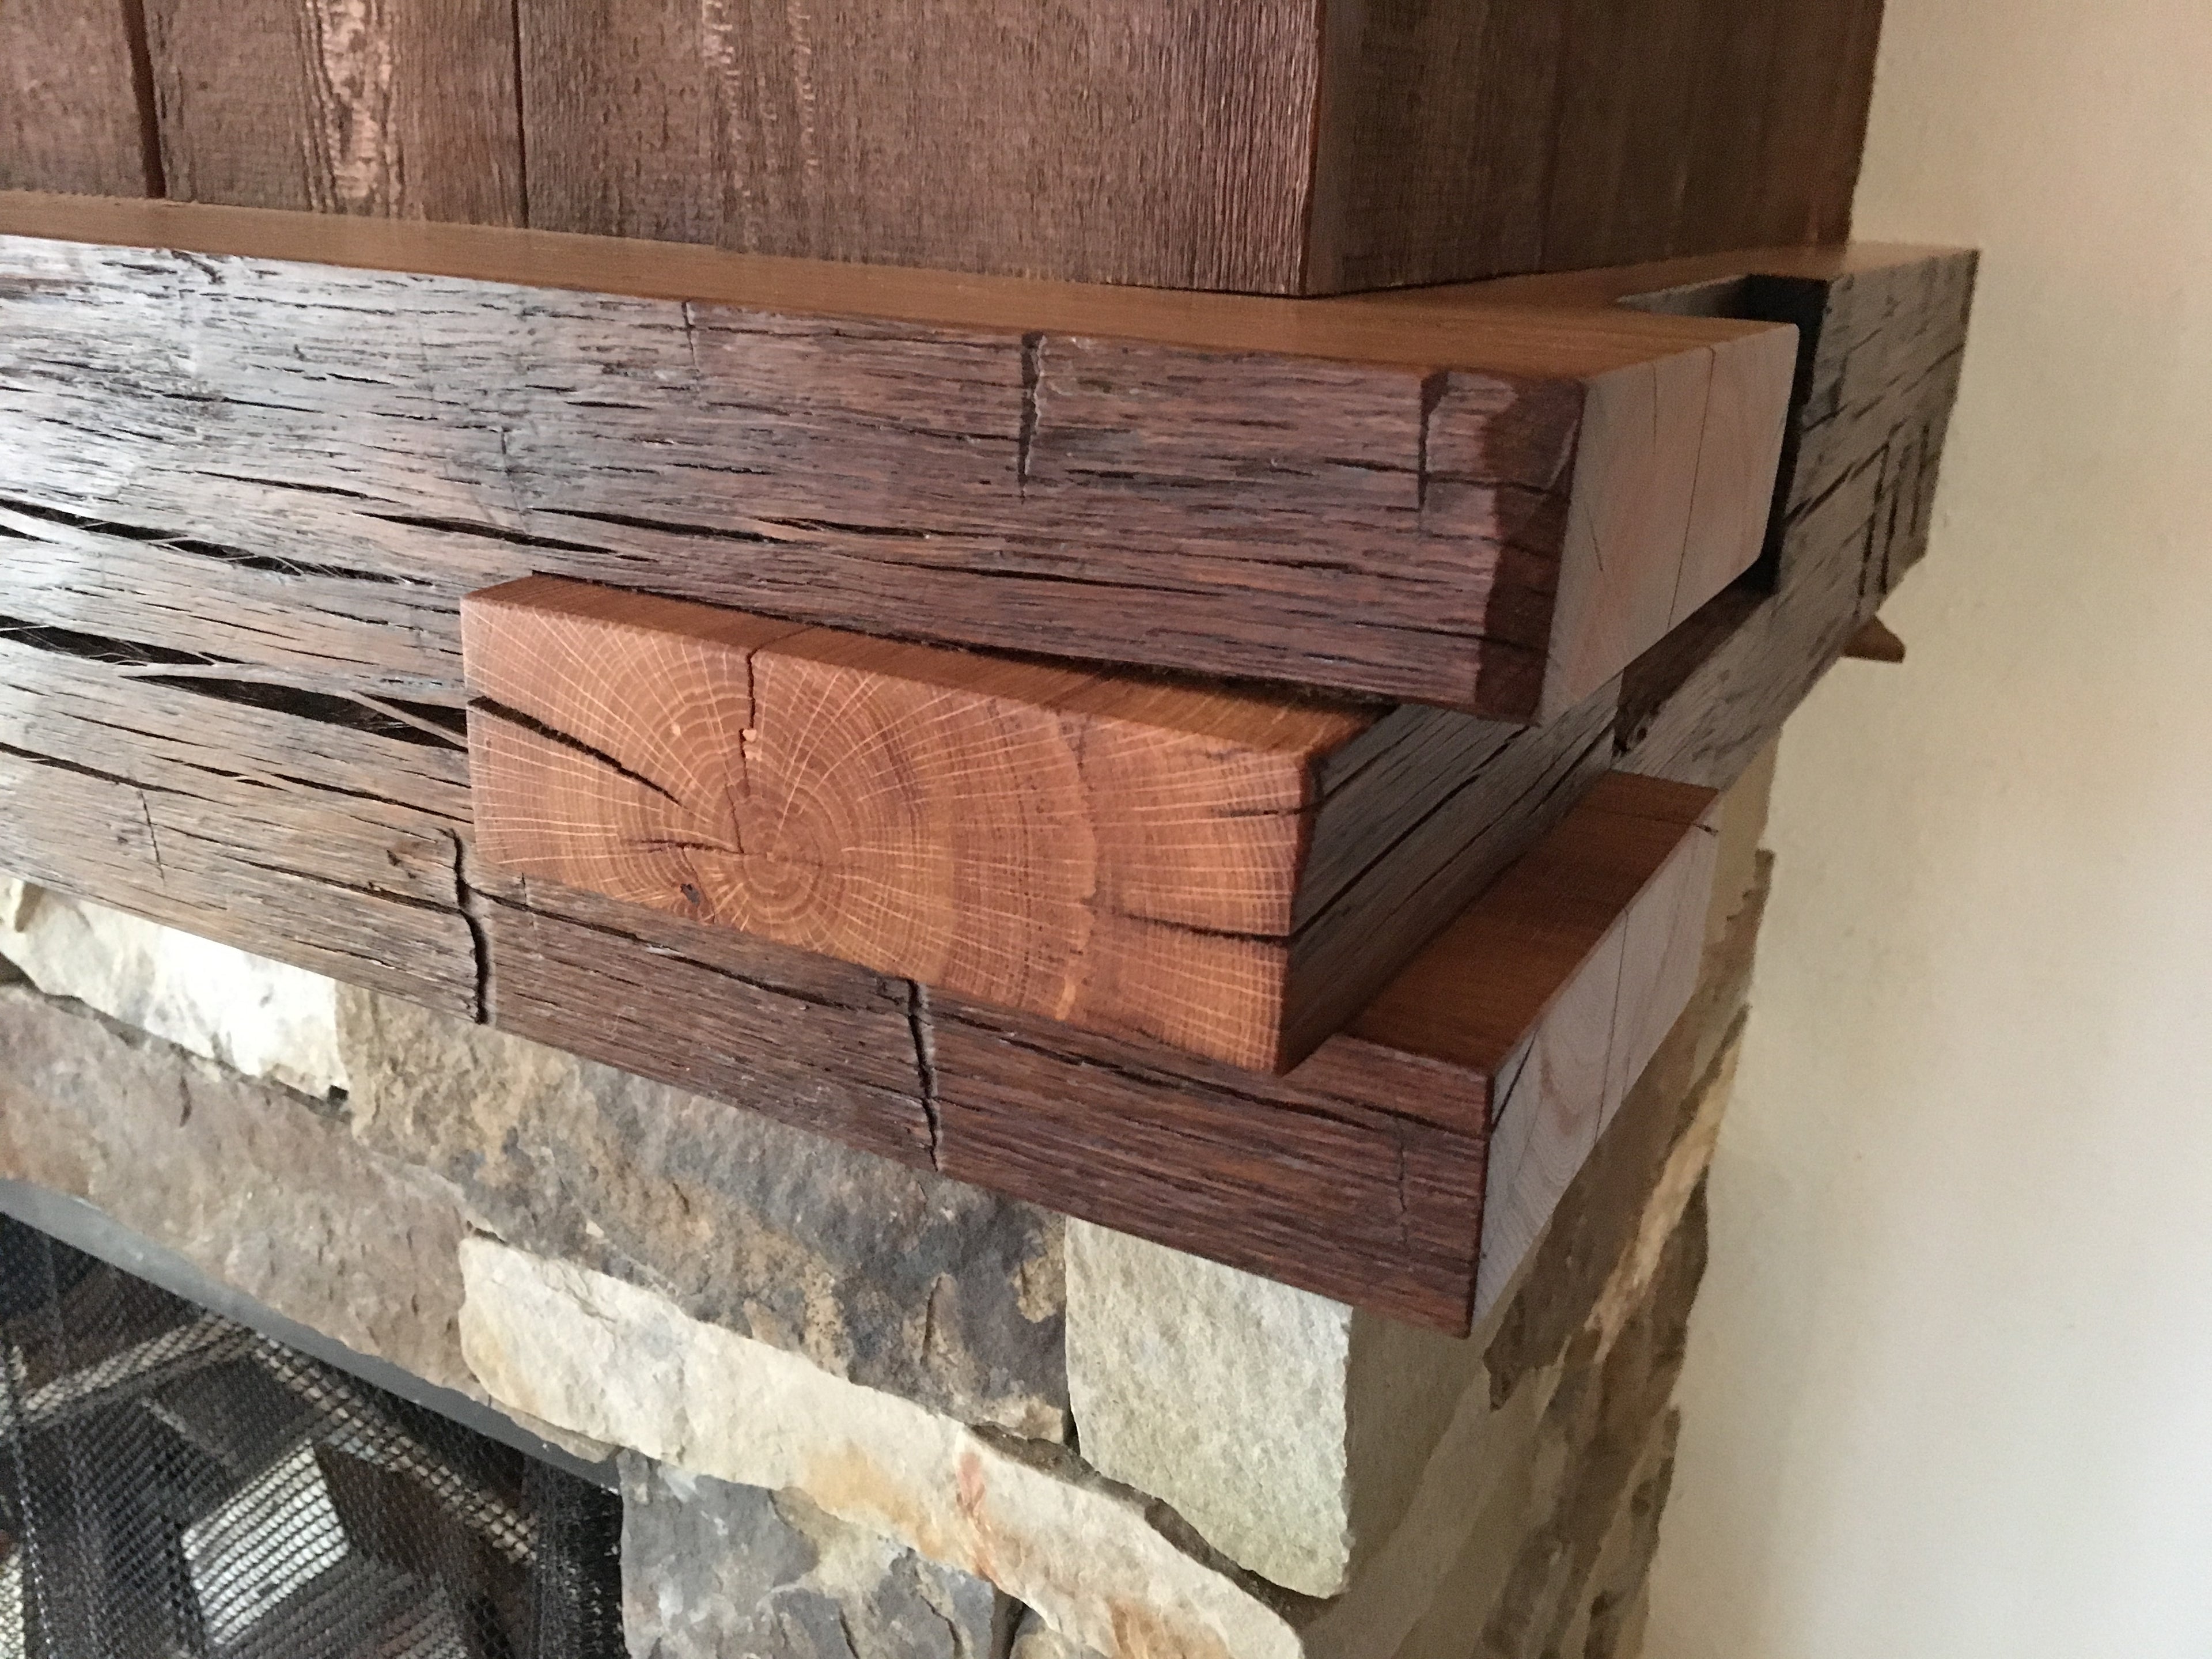 WHY USE LINSEED OIL TO PROTECT WOOD? – Livos